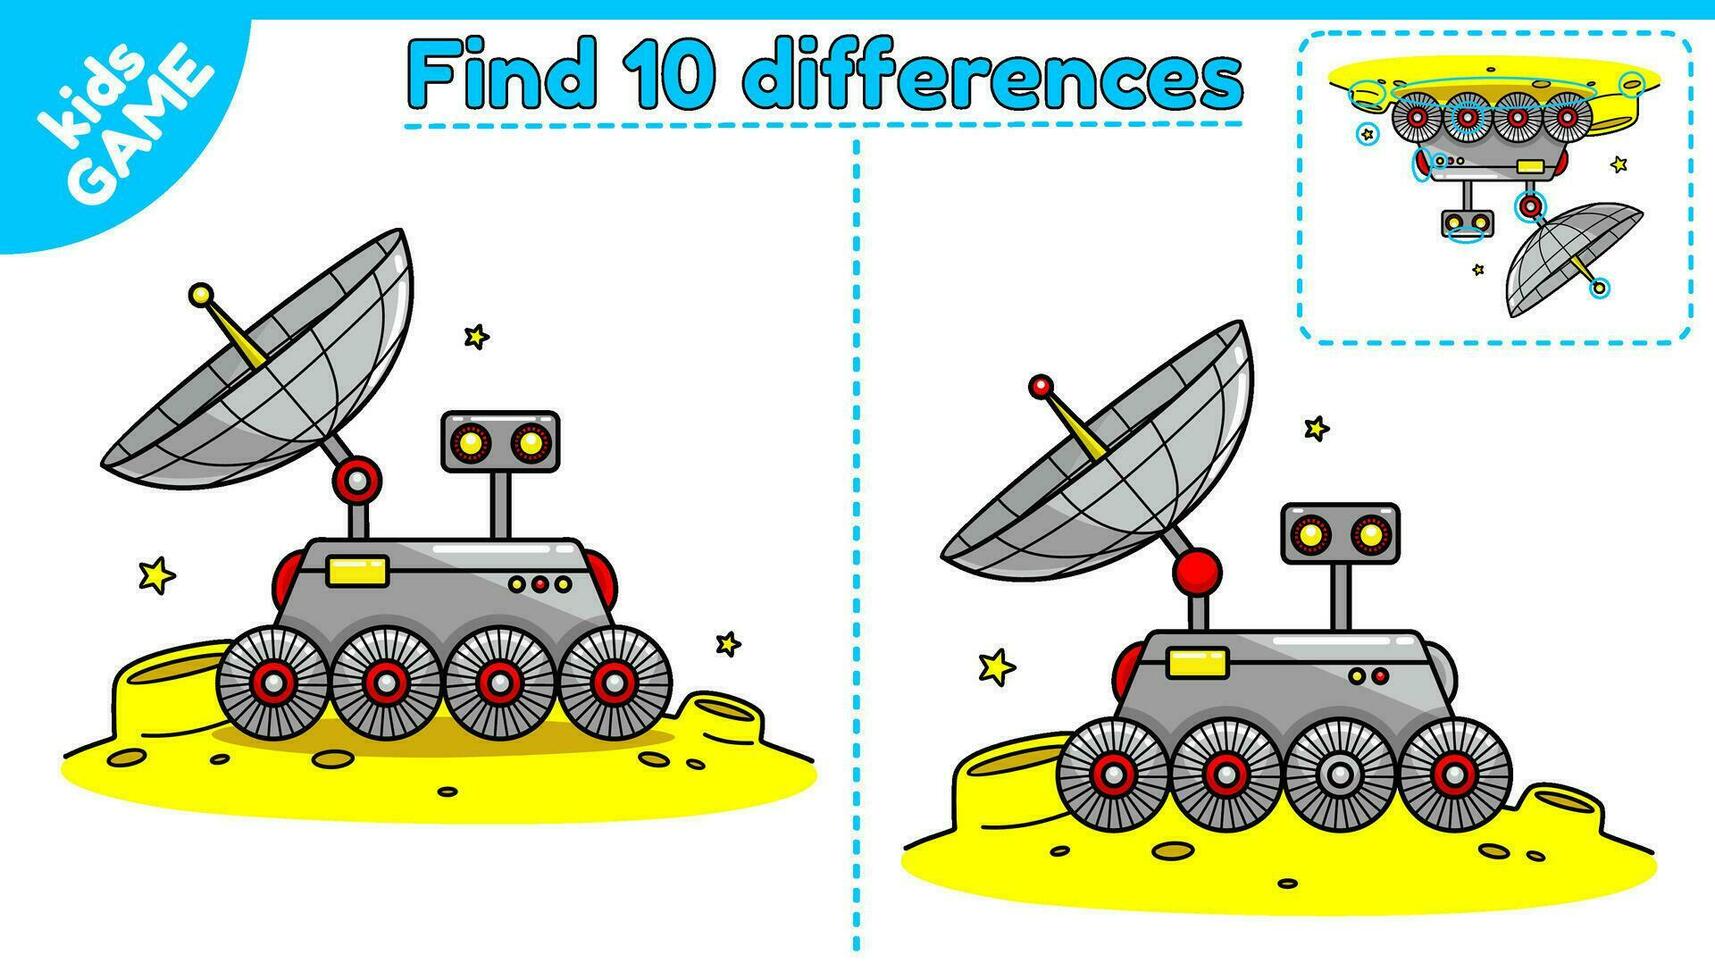 Educational game for kids. Find 10 differences. Cartoon lunar rover on moon in space. Puzzle for children. Worksheet for preschool and school education. Isolated vector illustration on cosmos theme.